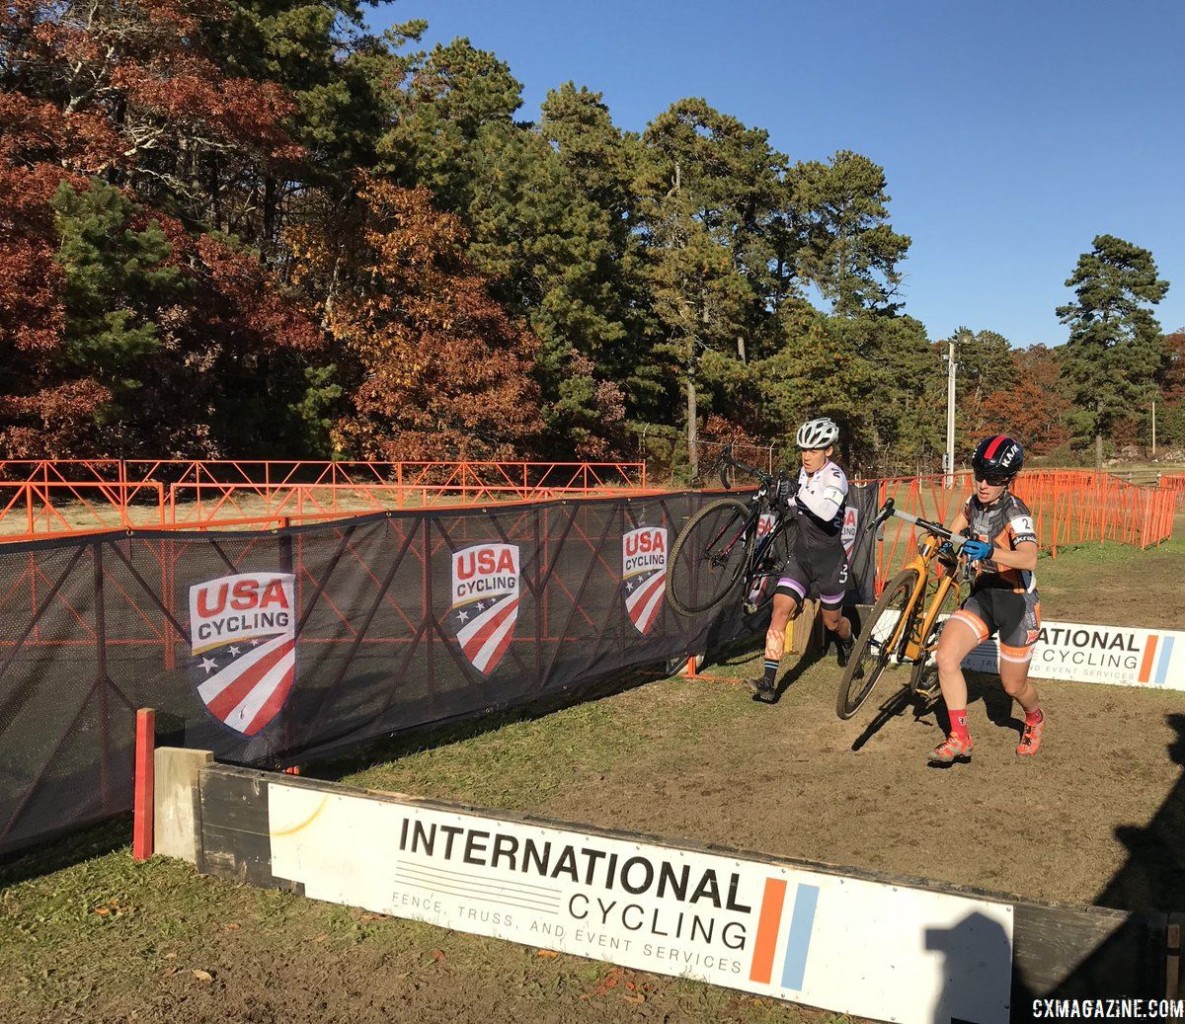 Arley Kemmerer and Crystal Anthony hit the barriers together. 2018 Really Rad Festival of Cyclocross Day 2. © Angelica Dixon